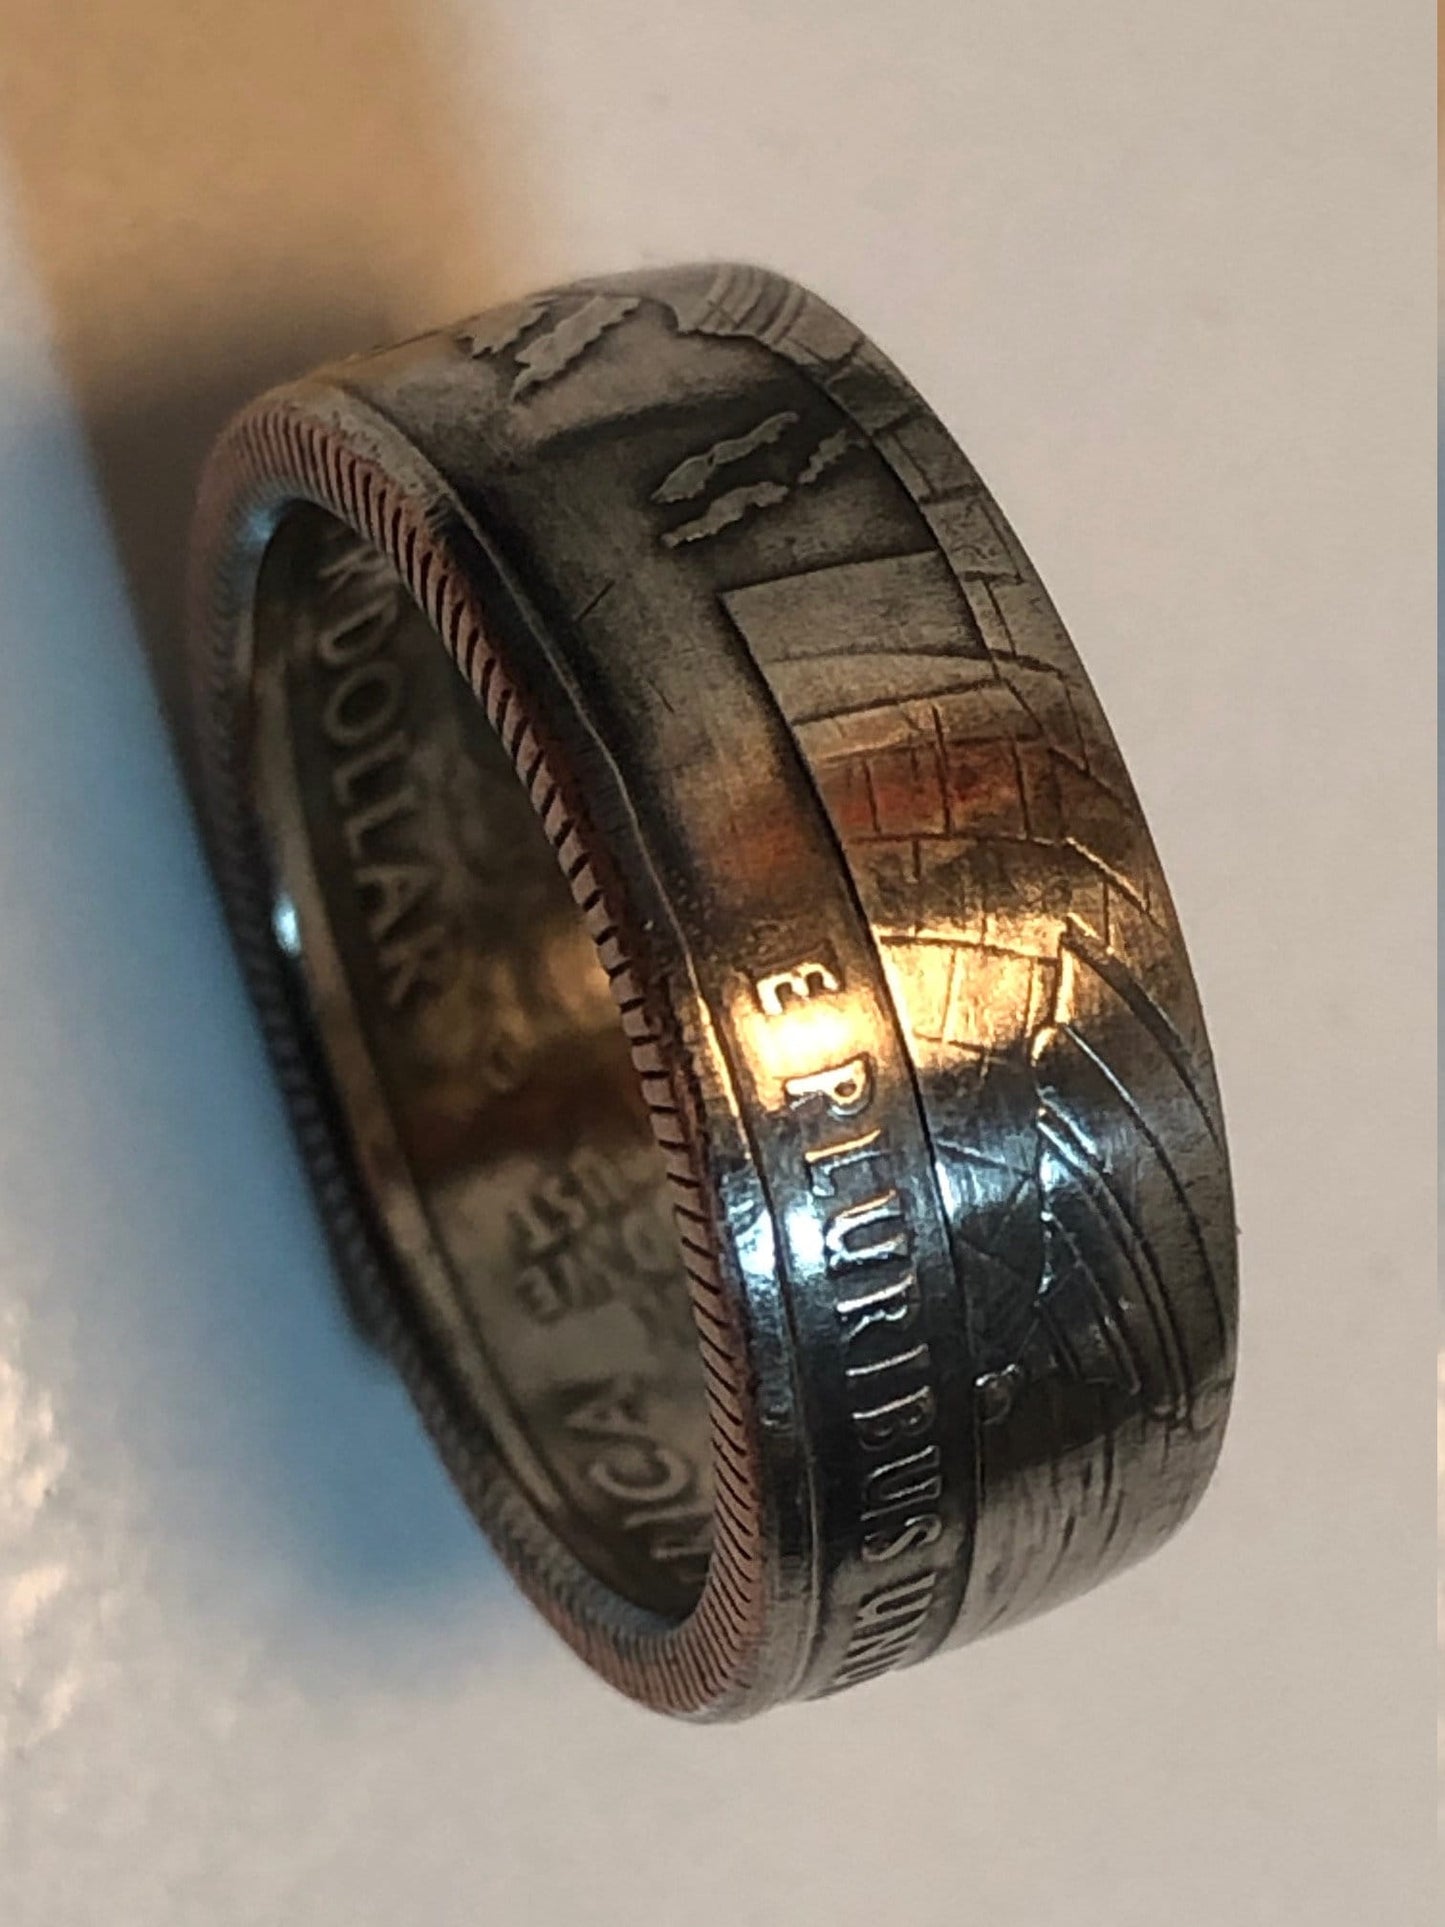 Puerto Rico Ring State Quarter Coin Ring Hand Made